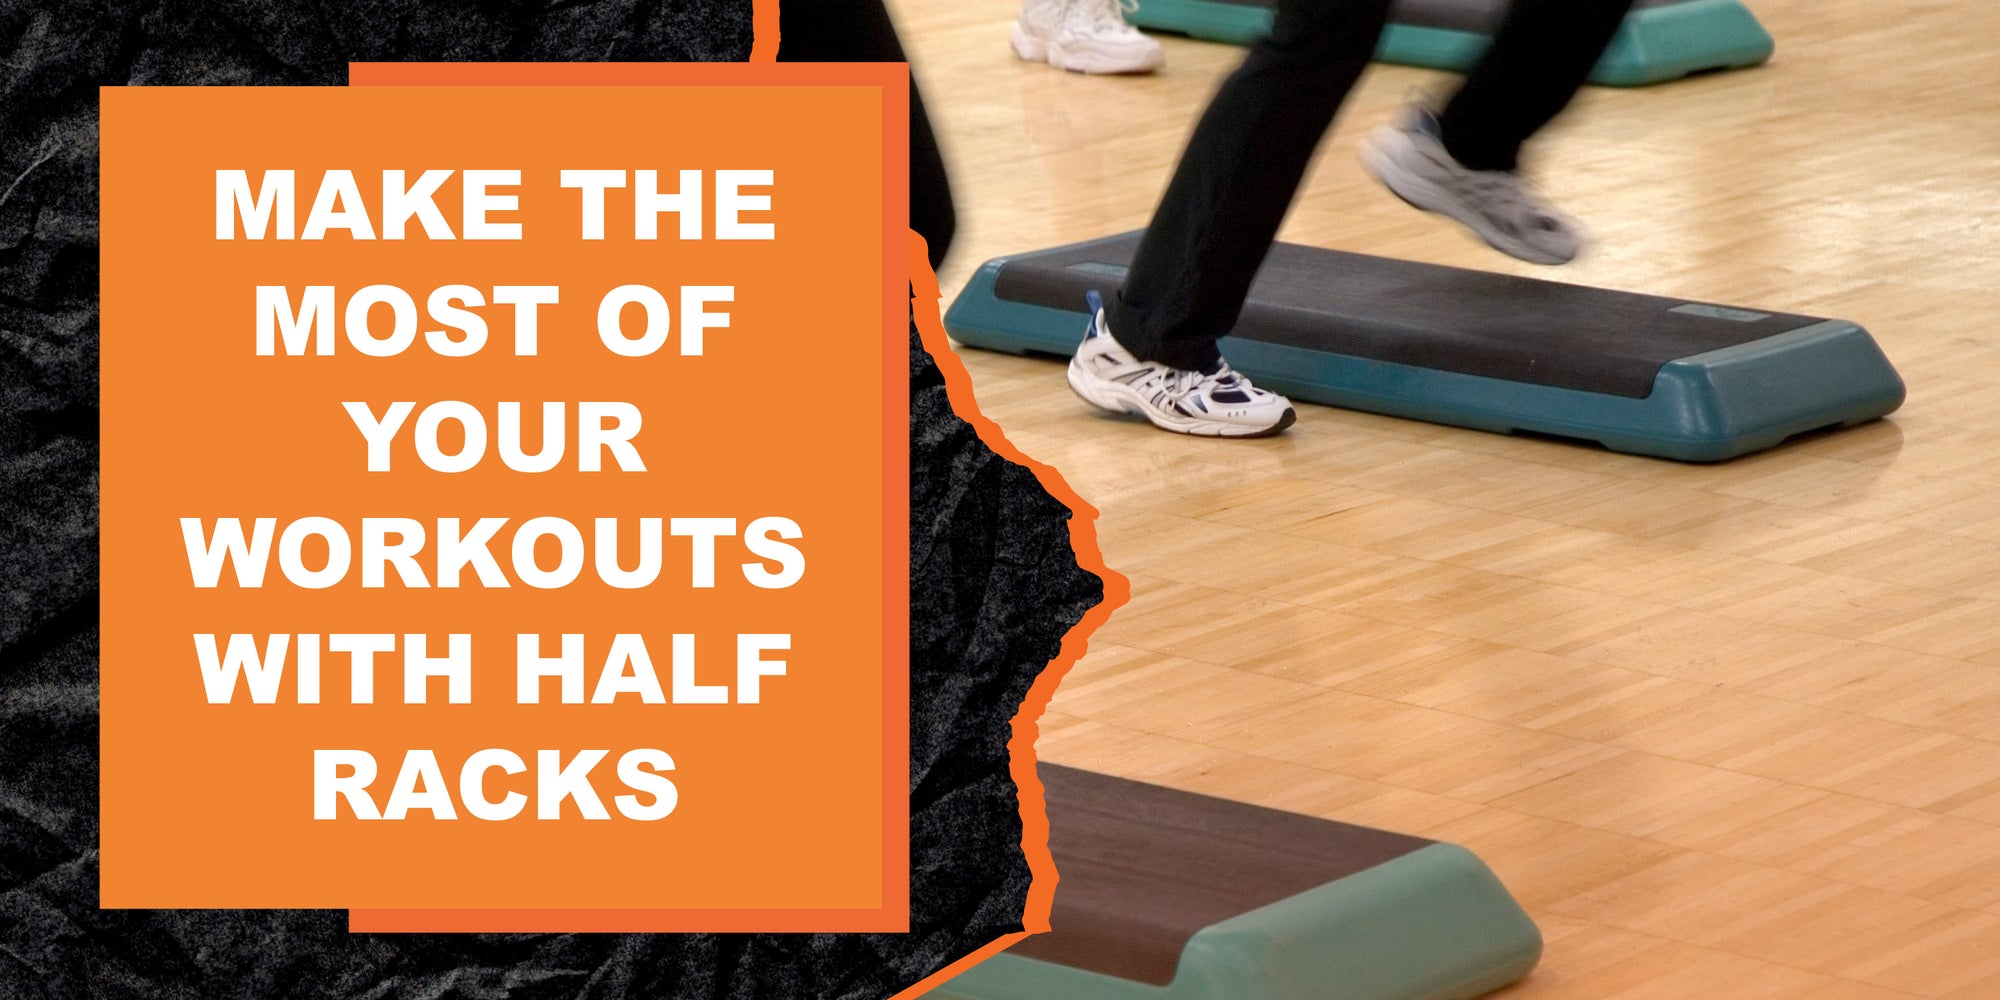 Make the Most of Your Workouts with Half Racks